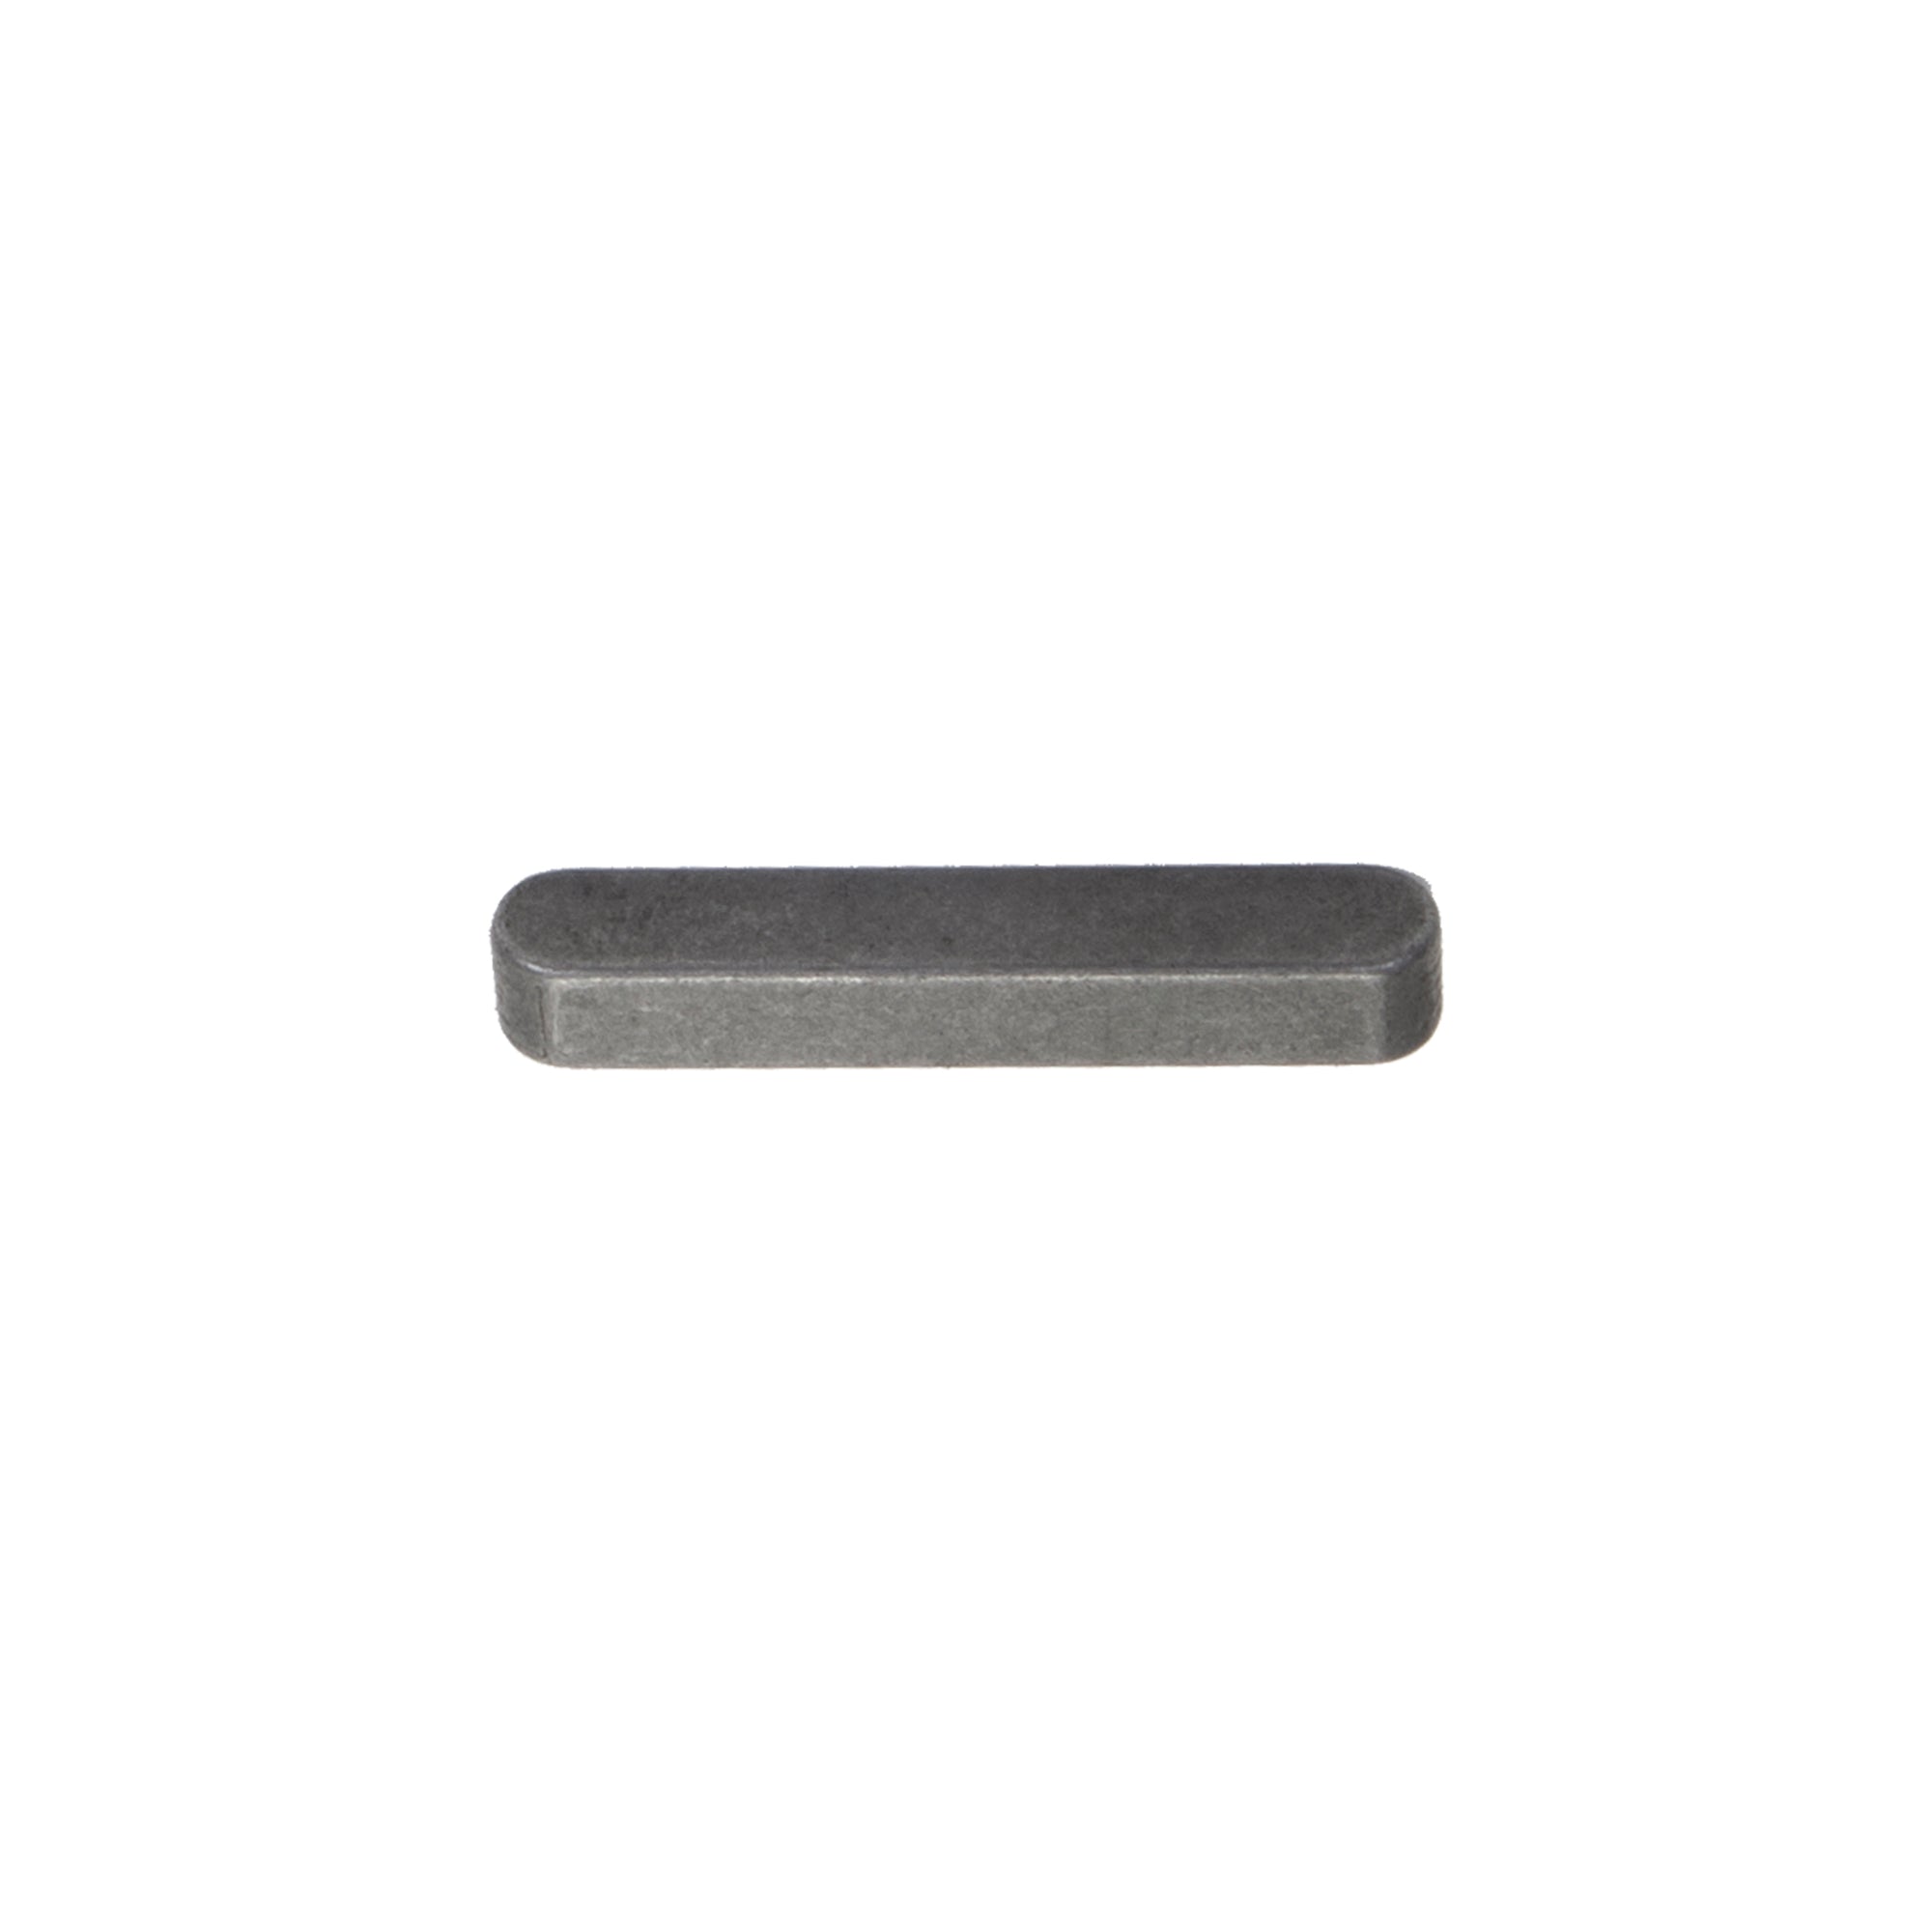 Sun Bicycle Axle Parts - Trike Axle Key, 4x4x15mm (Fits 15mm and 17mm trike axles)